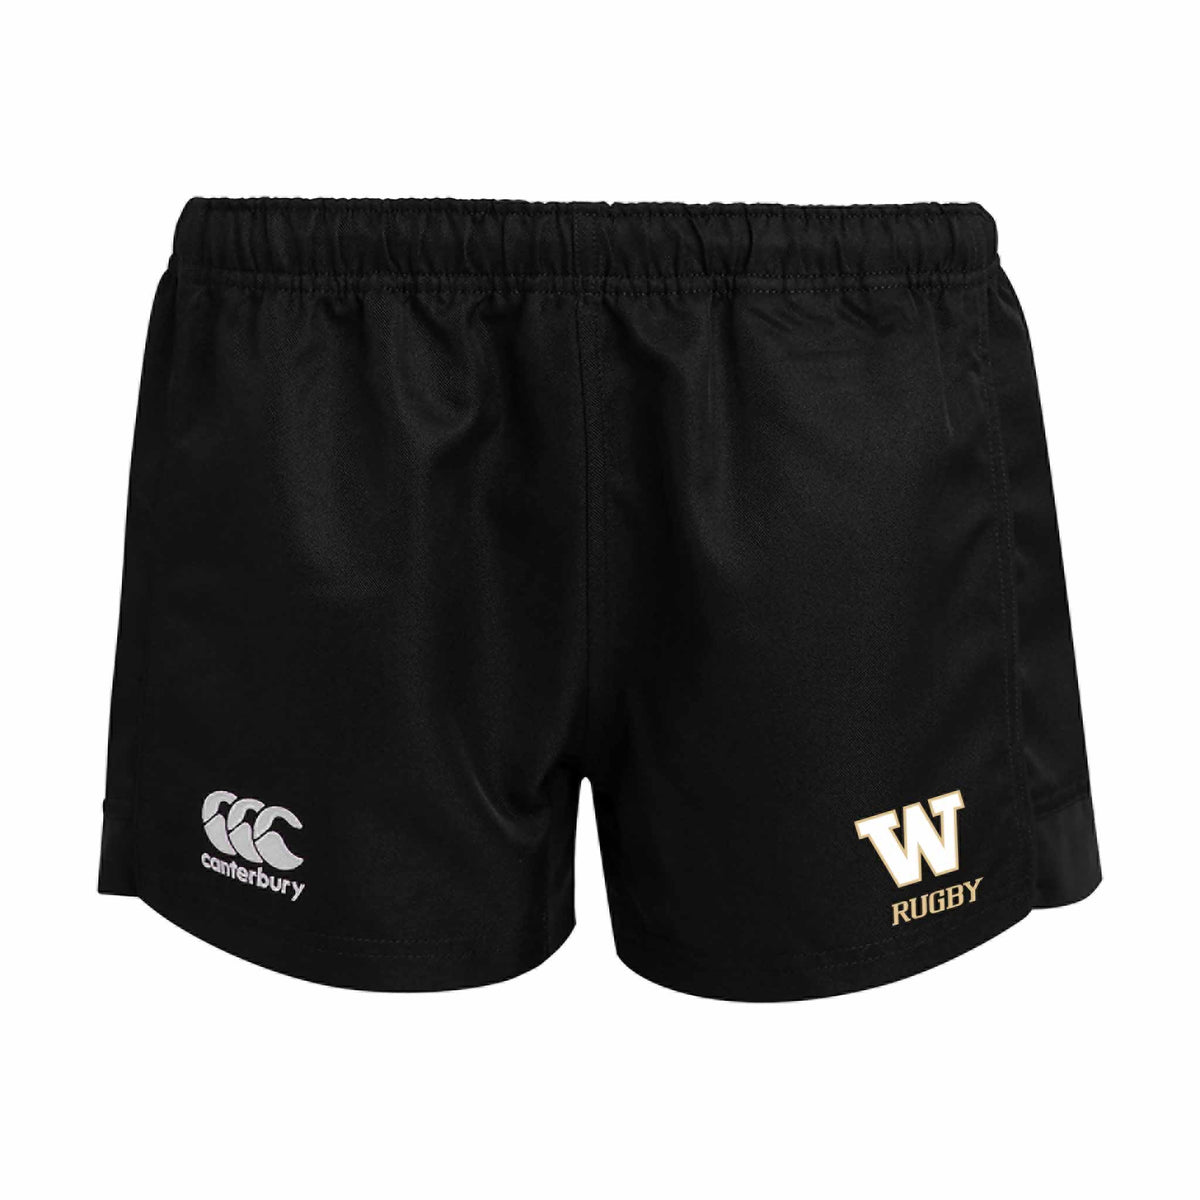 UW Women&#39;s Huskies Rugby Club Canterbury AdvanTage Shorts- WOMEN&#39;S - Black - The Rugby Shop The Rugby Shop WOMEN&#39;S / Black / 6 TRS Distribution Canada Rugby Shorts UW Women&#39;s Huskies Rugby Club Canterbury AdvanTage Shorts- WOMEN&#39;S - Black